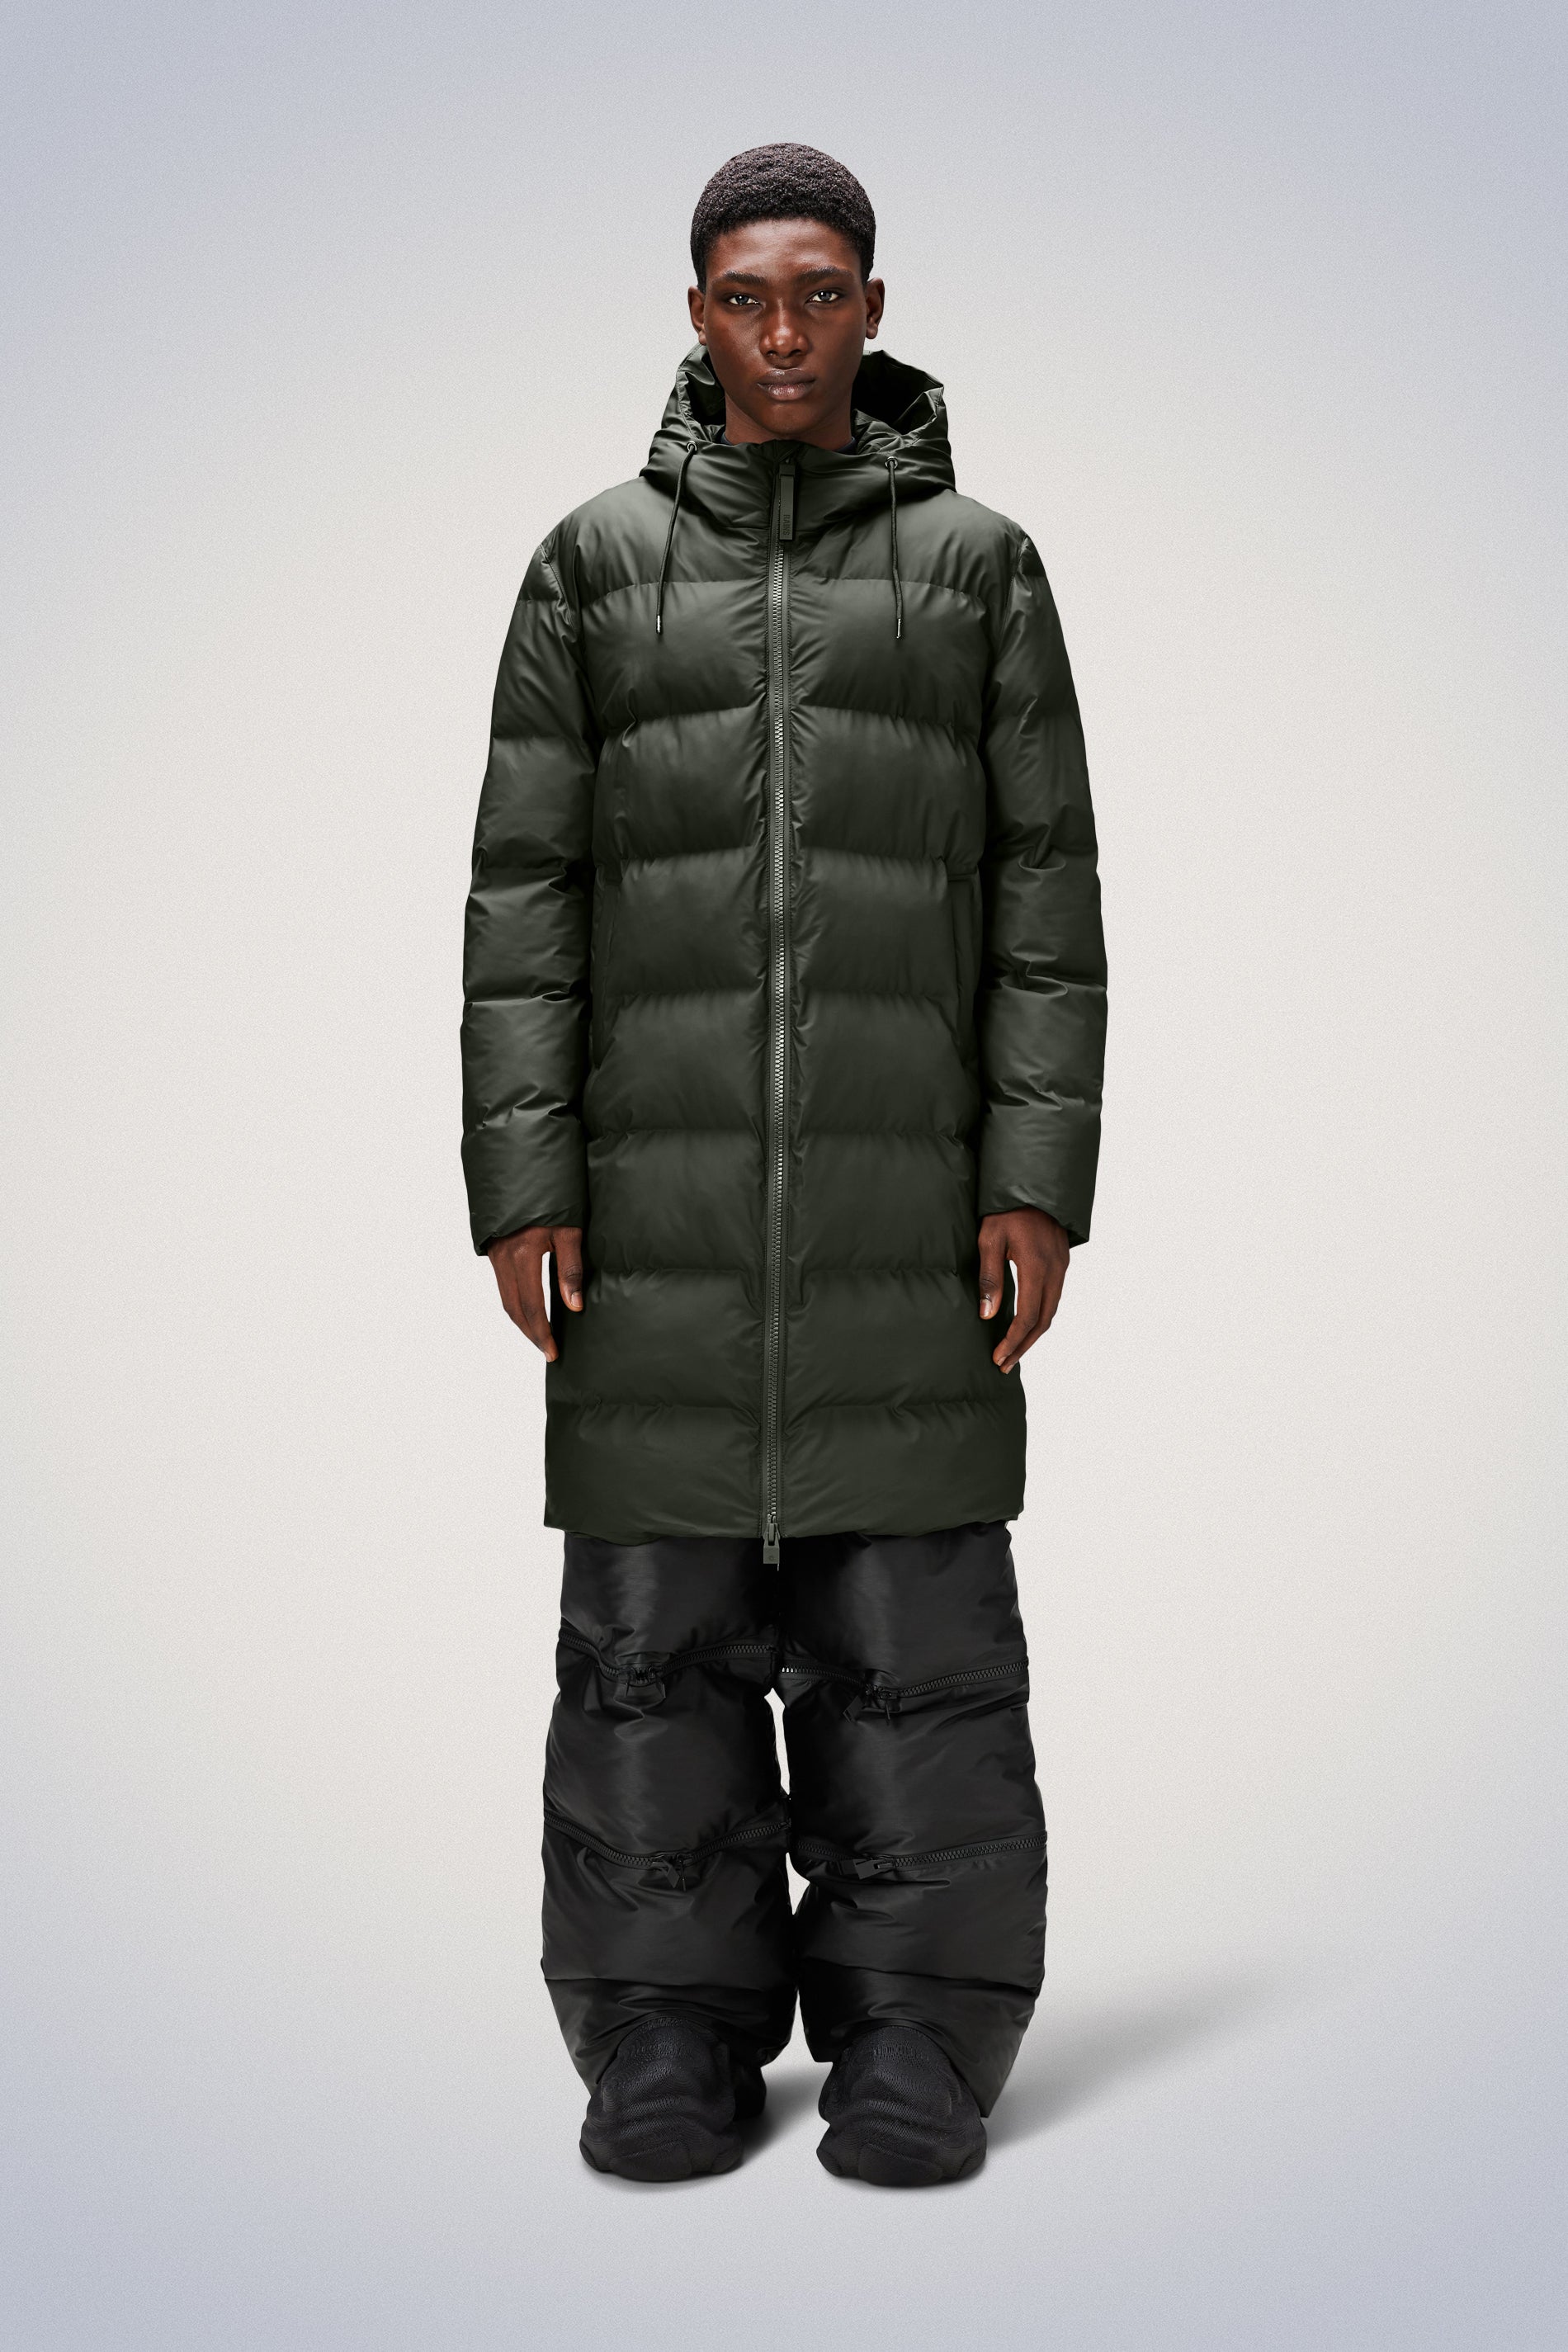 Rains® Alta Long Puffer Jacket in Black for $515